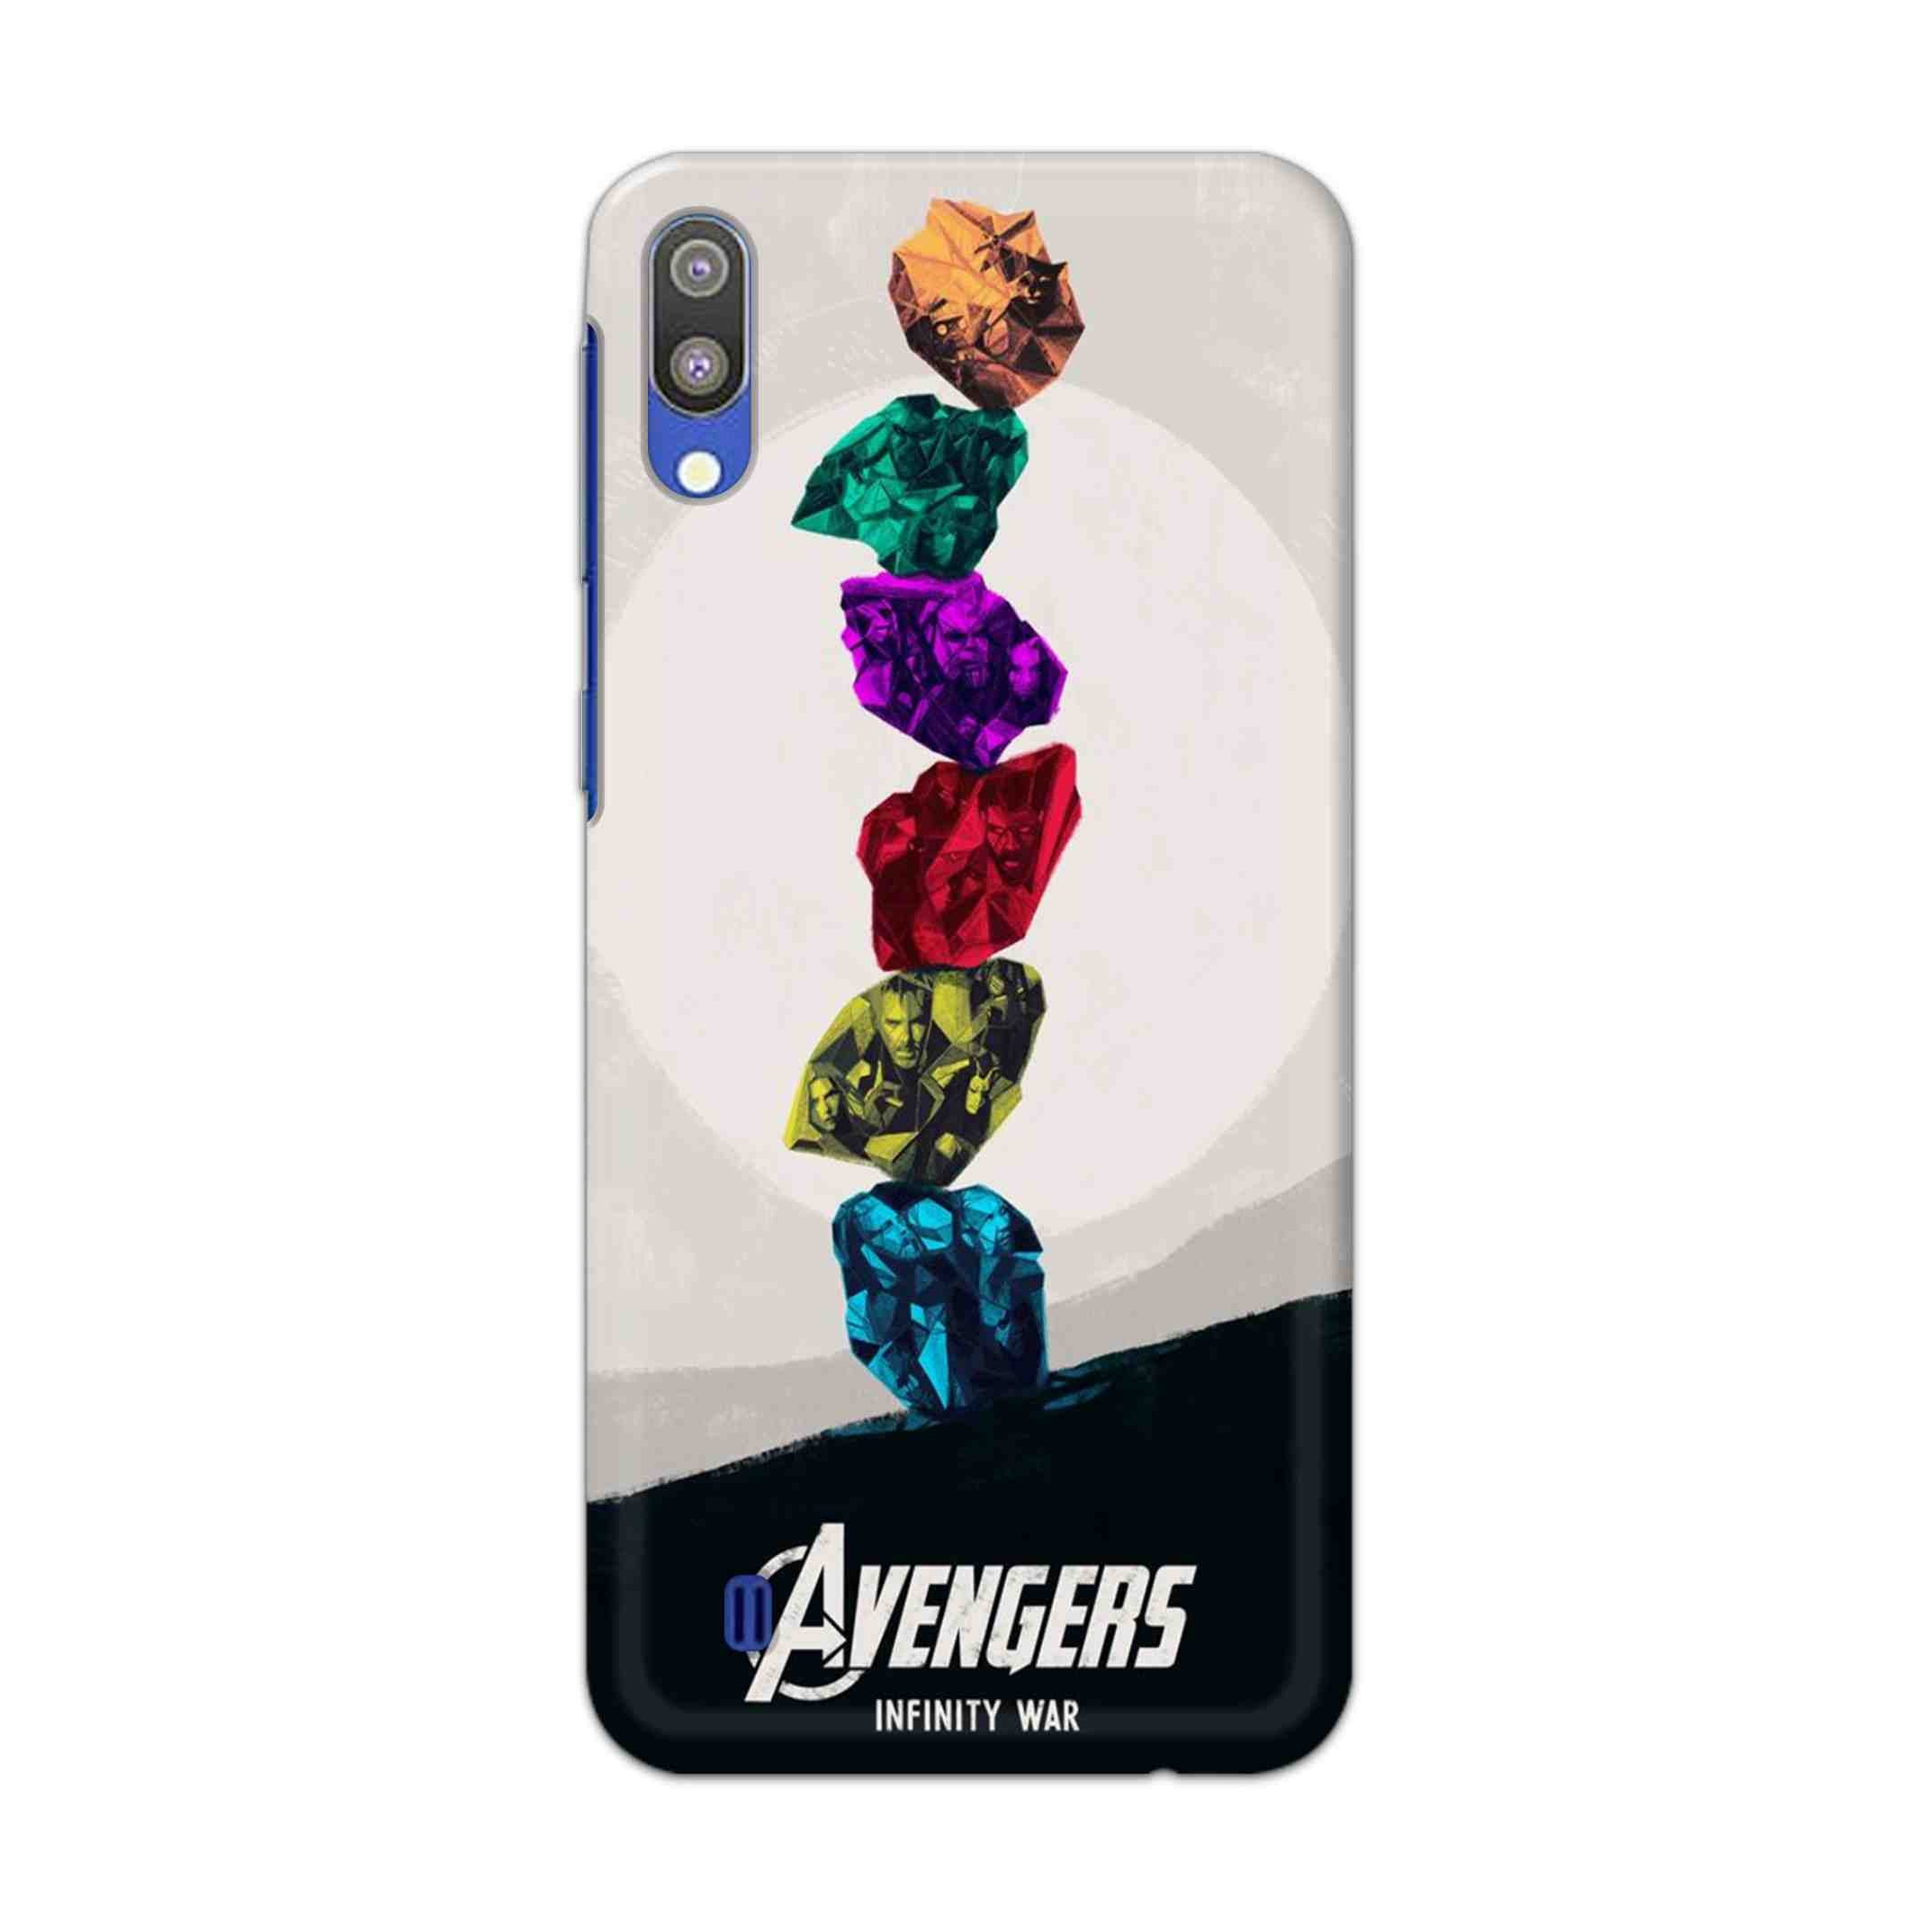 Buy Avengers Stone Hard Back Mobile Phone Case Cover For Samsung Galaxy M10 Online